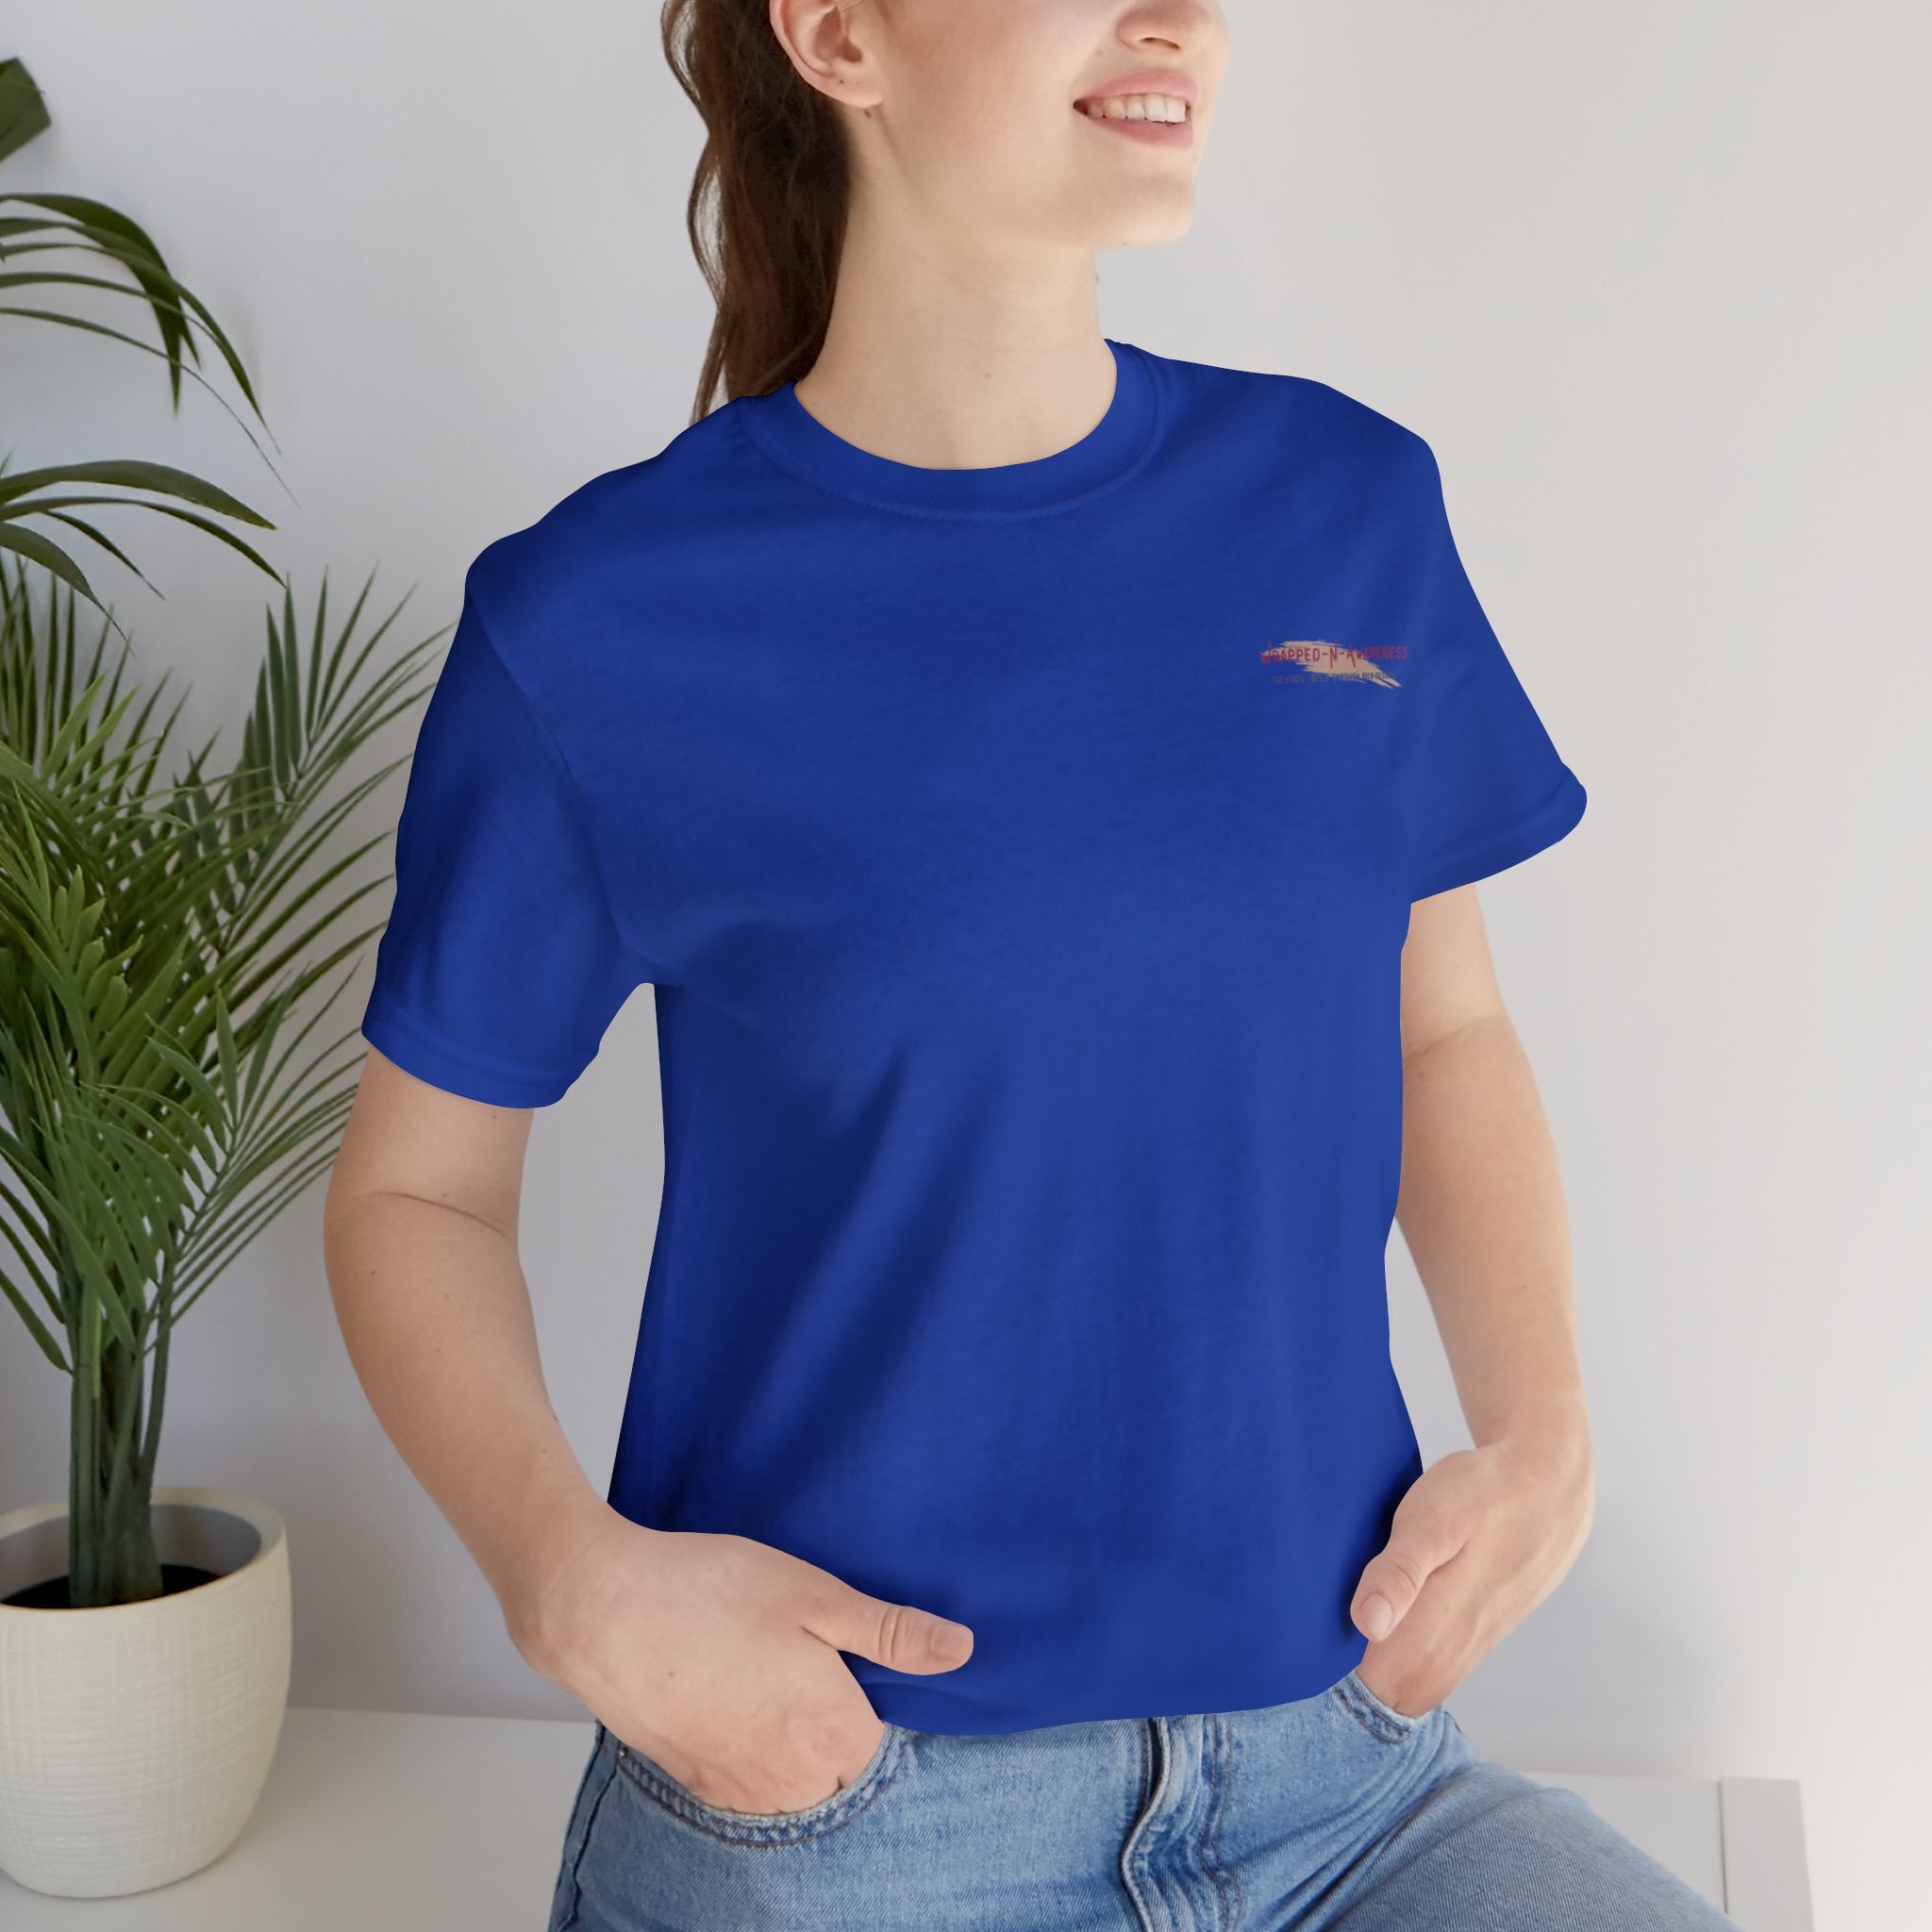 Mindfulness Heals Wounds Tee - Bella+Canvas 3001 Turquoise Airlume Cotton Bella+Canvas 3001 Crew Neckline Jersey Short Sleeve Lightweight Fabric Mental Health Support Retail Fit Tear-away Label Tee Unisex Tee T-Shirt 8089421162464290695_2048 Printify